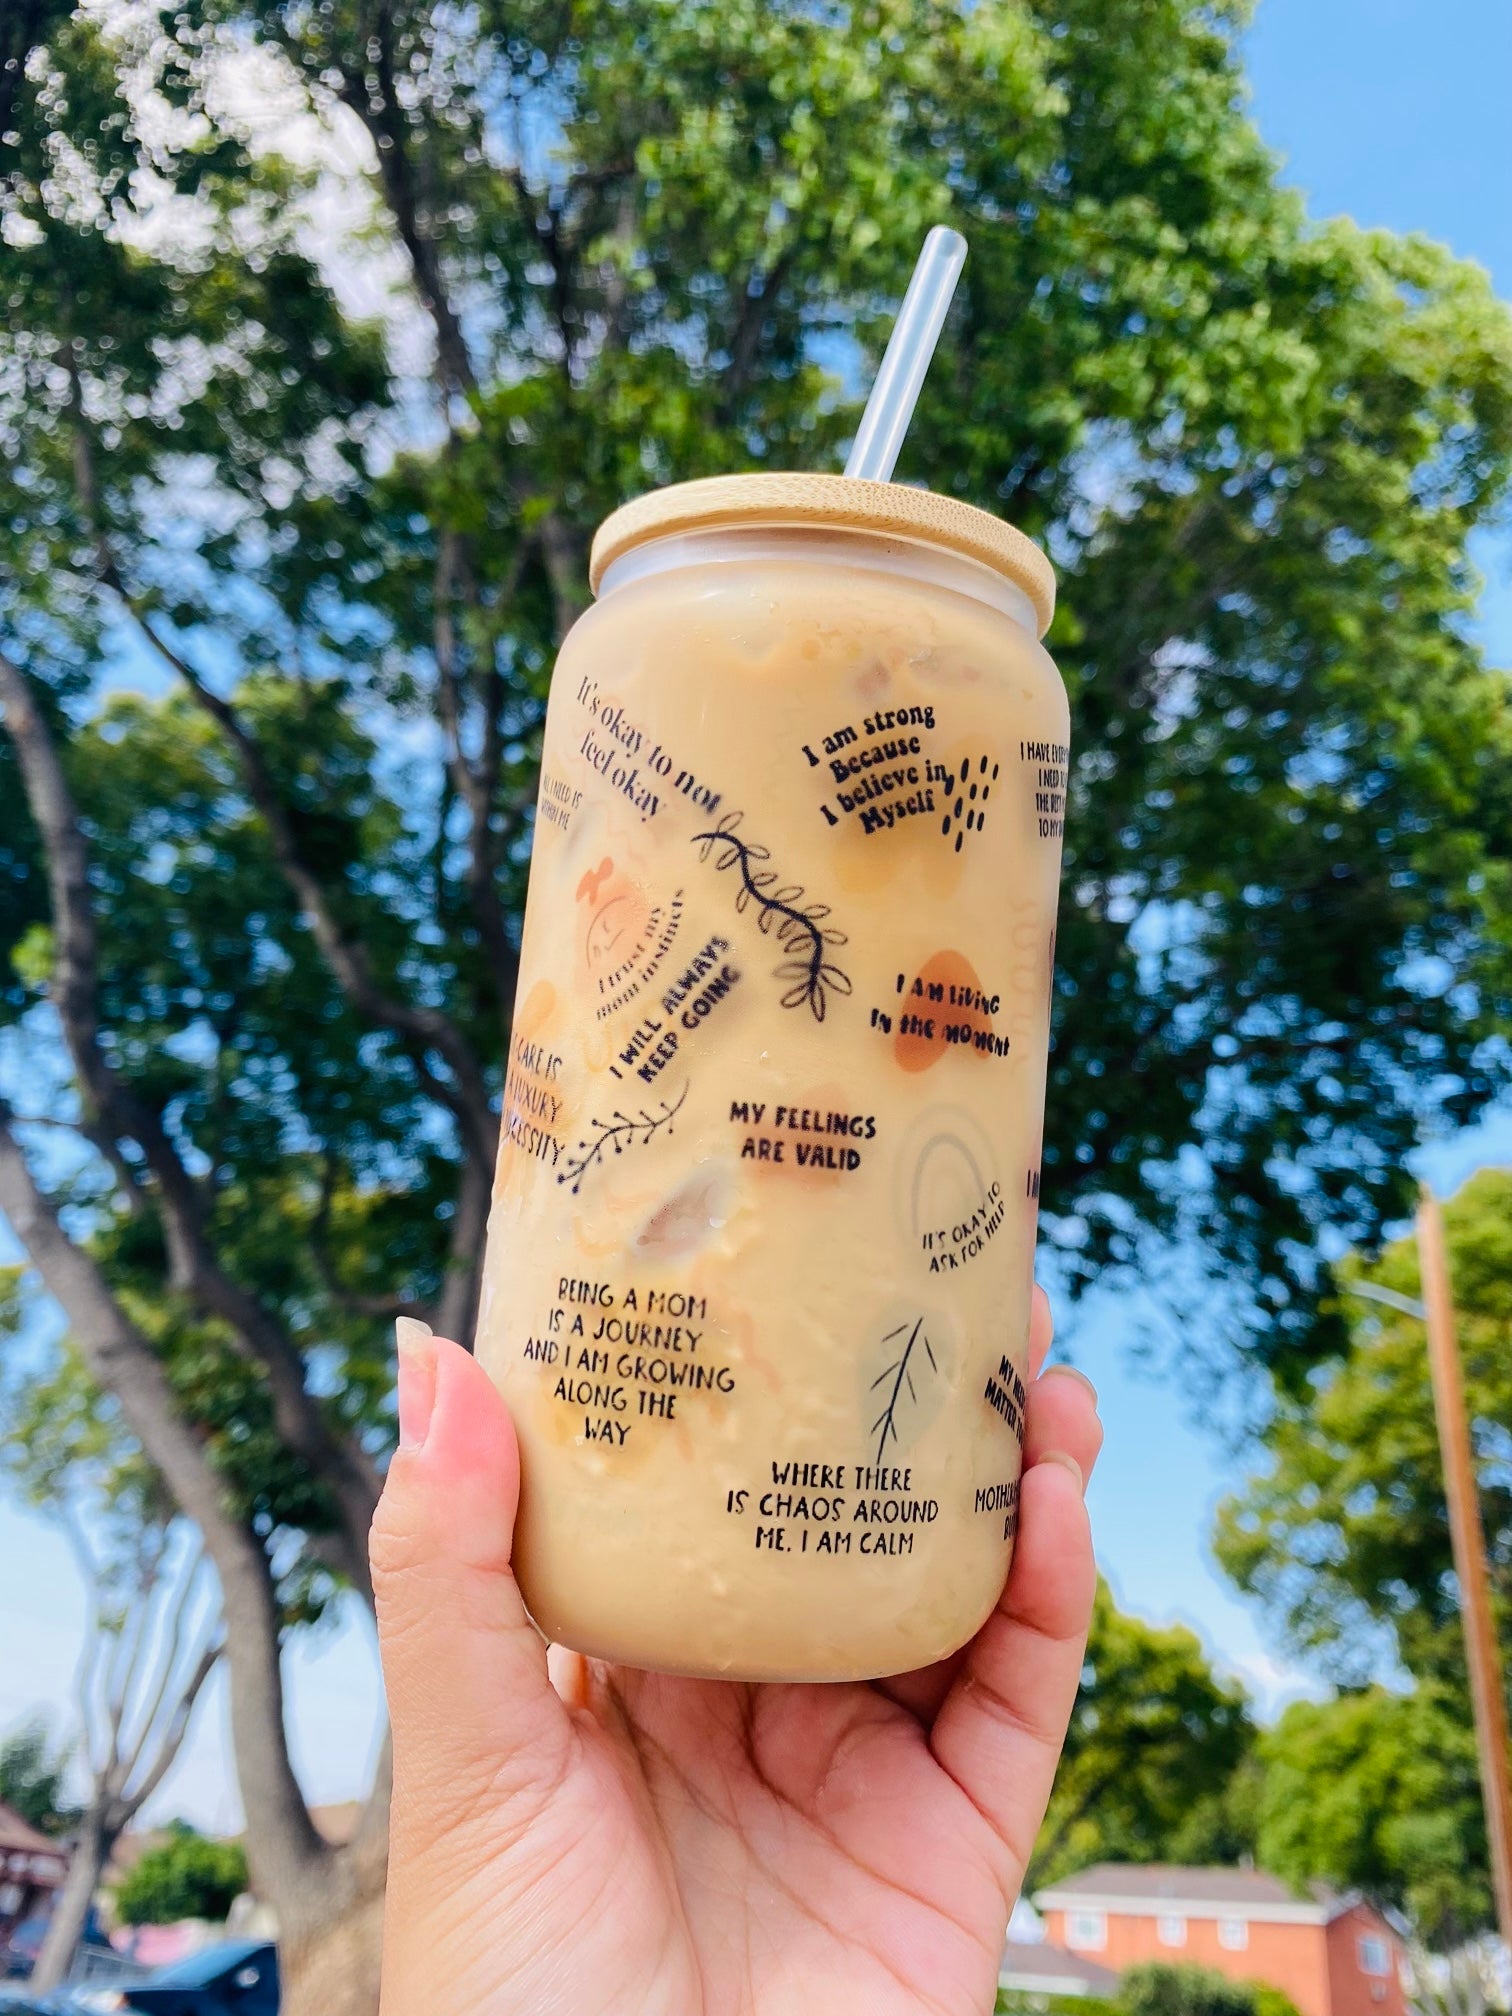 SoHo Iced Coffee Cup with Lid and Straw Caffeinated Mom Fuel - Encased